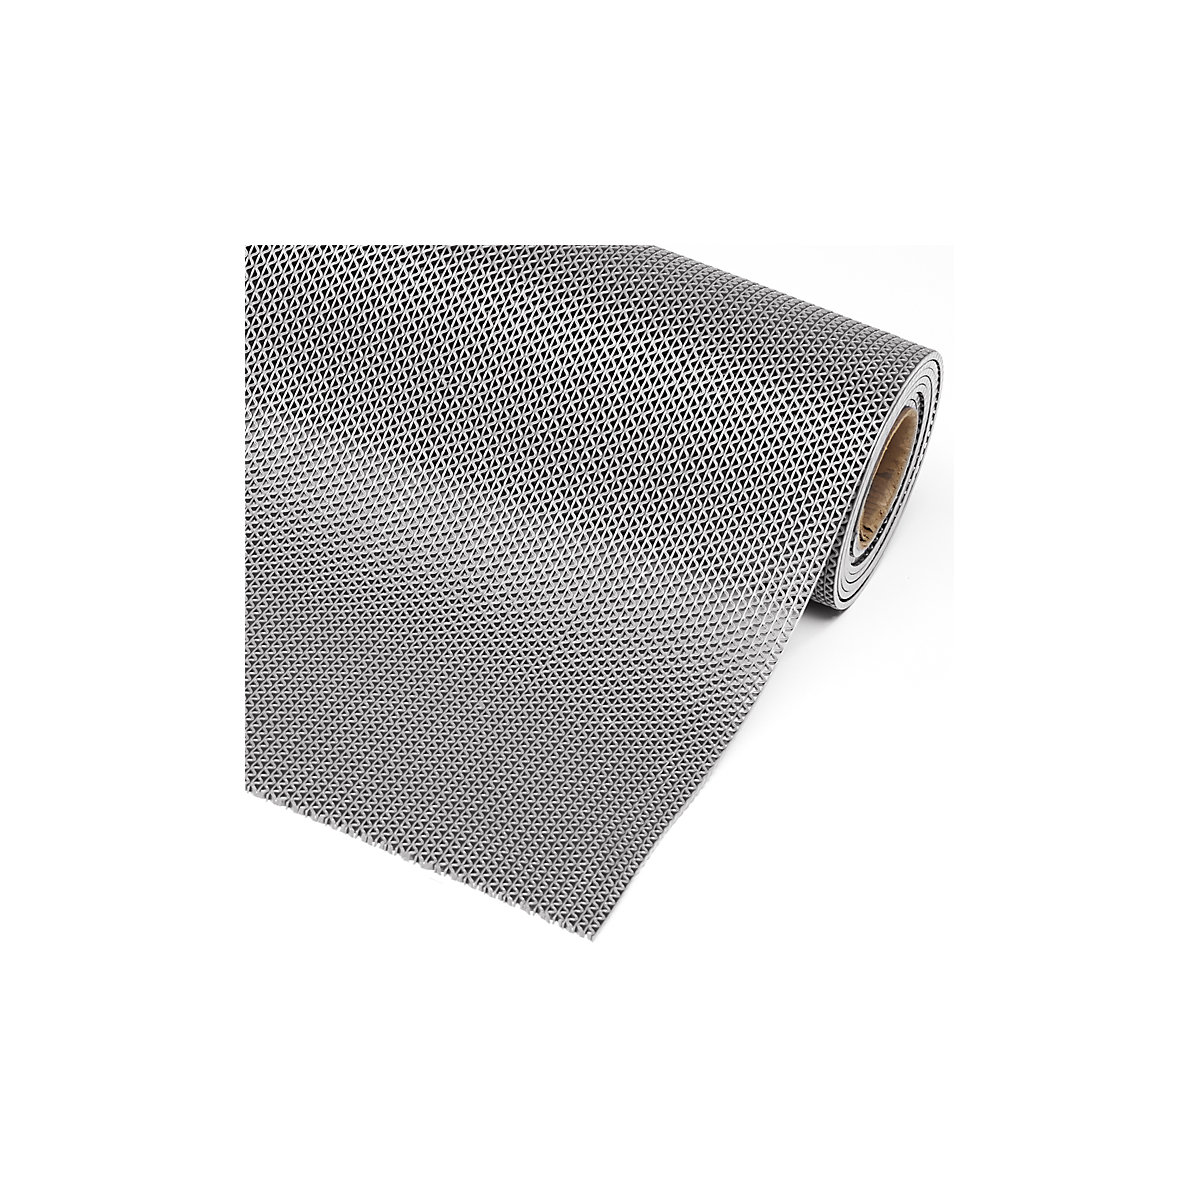 Wet room matting height 5.3 mm – NOTRAX, width 900 mm, sold by the metre, grey-3